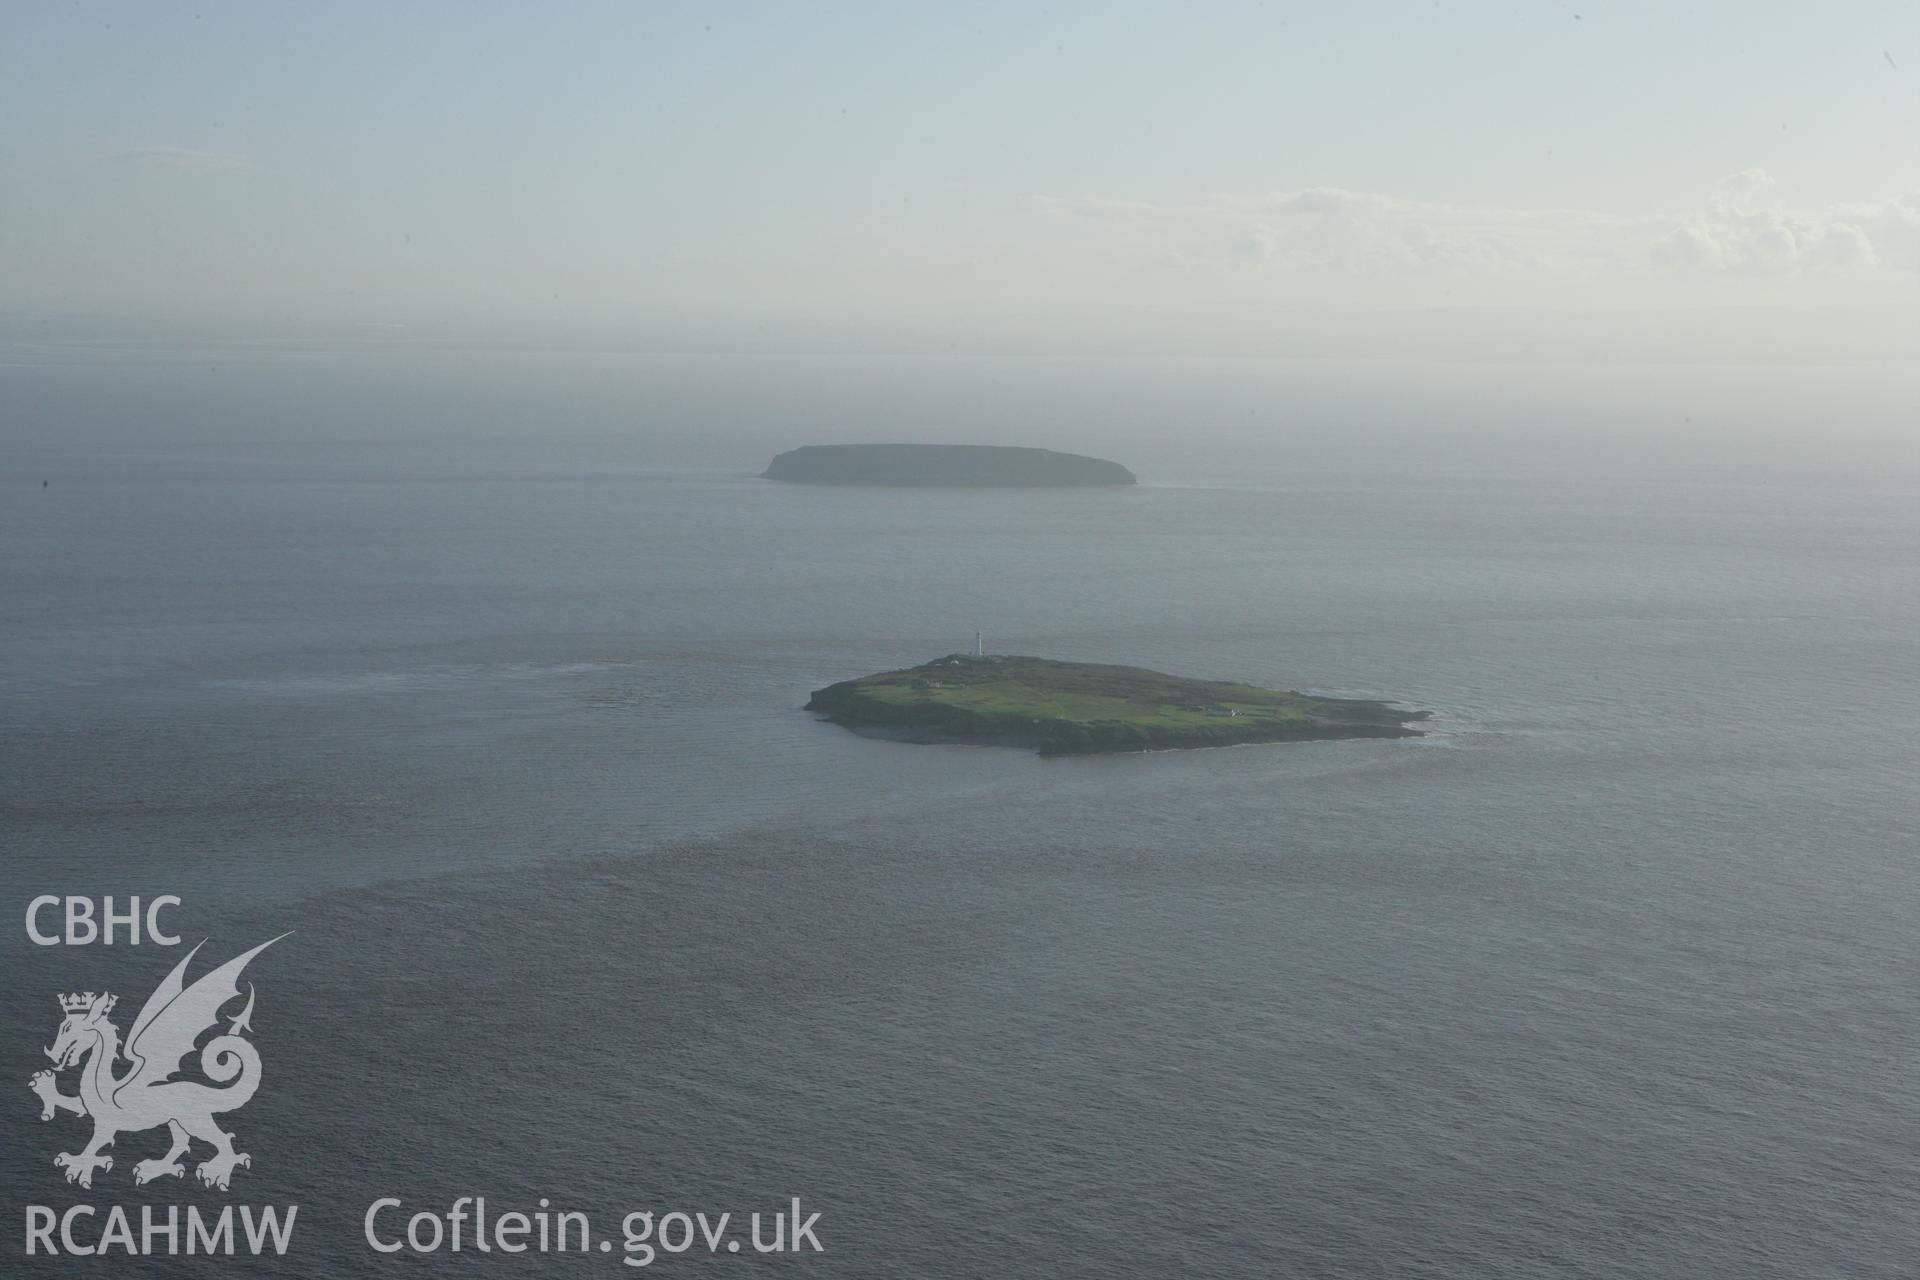 RCAHMW colour oblique photograph of Flat Holm and Steep Holm, from the north. Taken by Toby Driver on 12/11/2008.